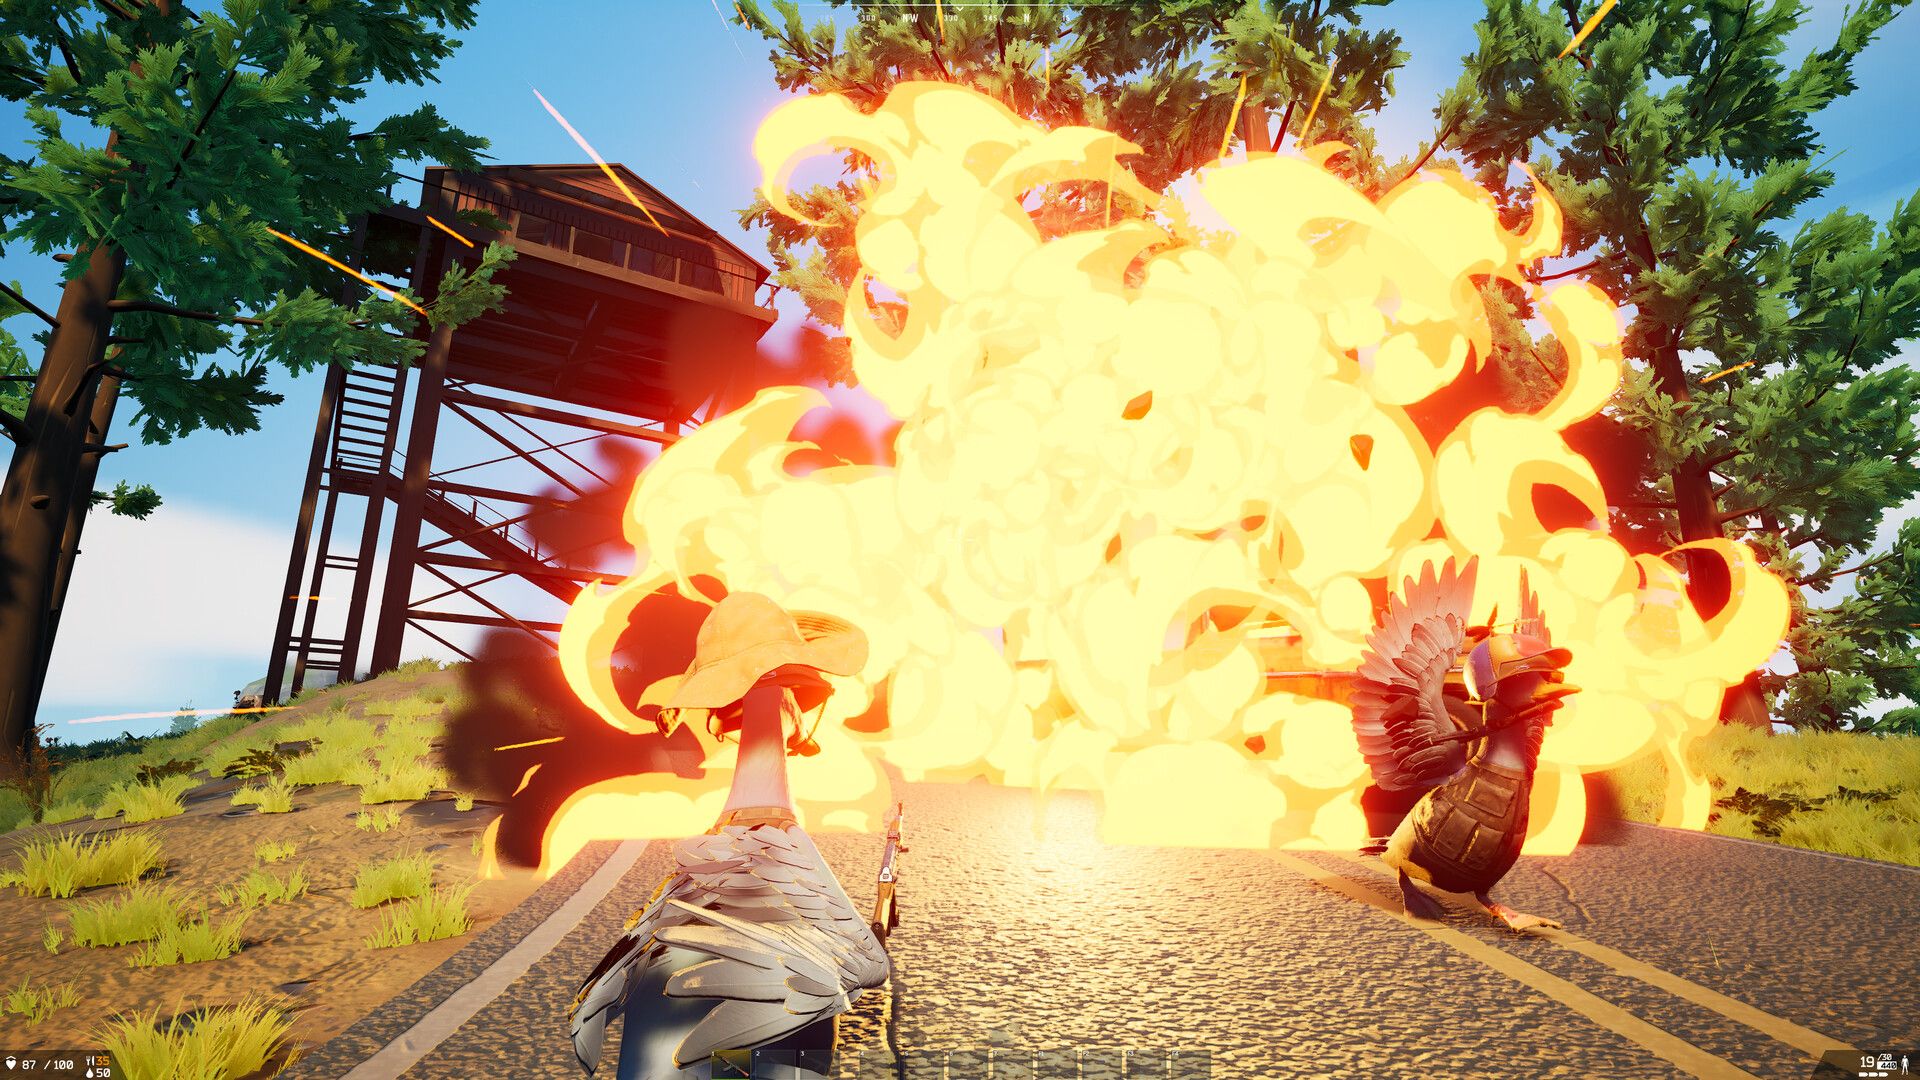 A screenshot from Duckside, a white duck in a brown bucket hat watches a large explosion while another duck wearing a bullet proof vest and a green military cap run from the fire with its wings up.